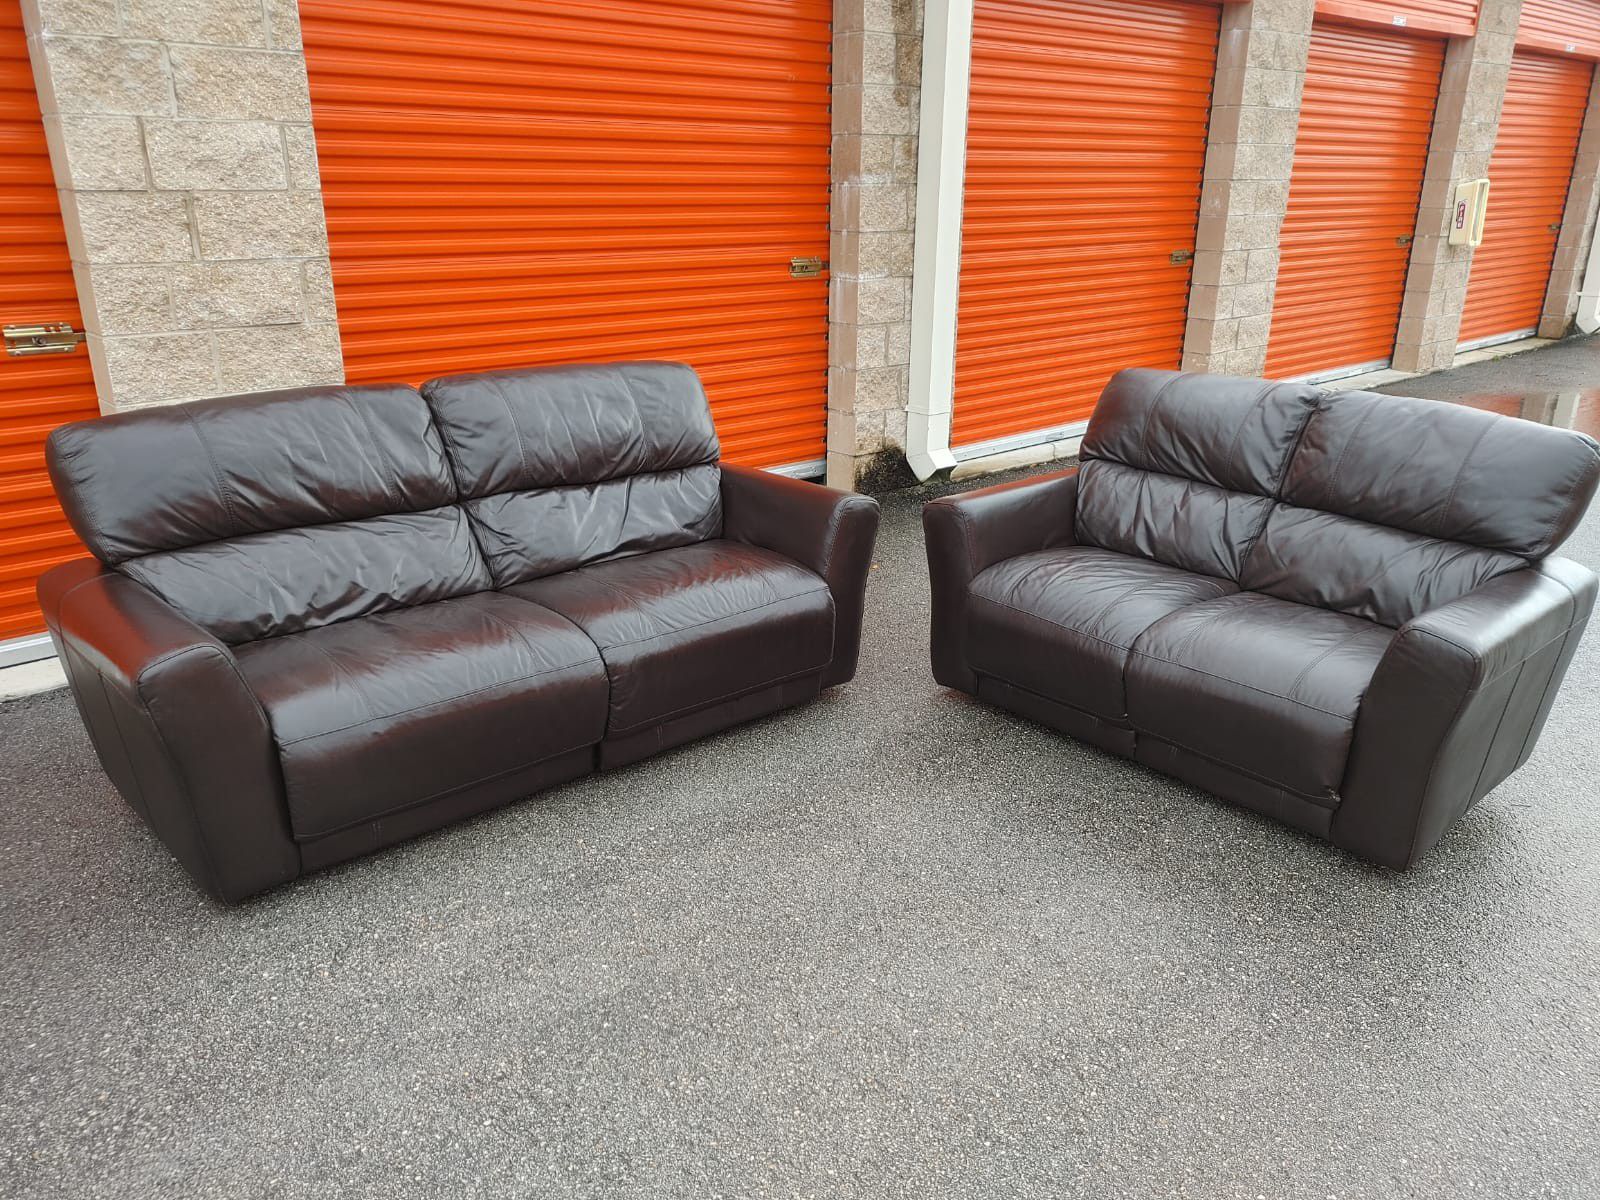 REAL / GENUINE ITALIAN LEATHER ELECTRIC RECLINERS SOFA SET - Couch + Loveseat - DELIVERY NEGOTIABLE